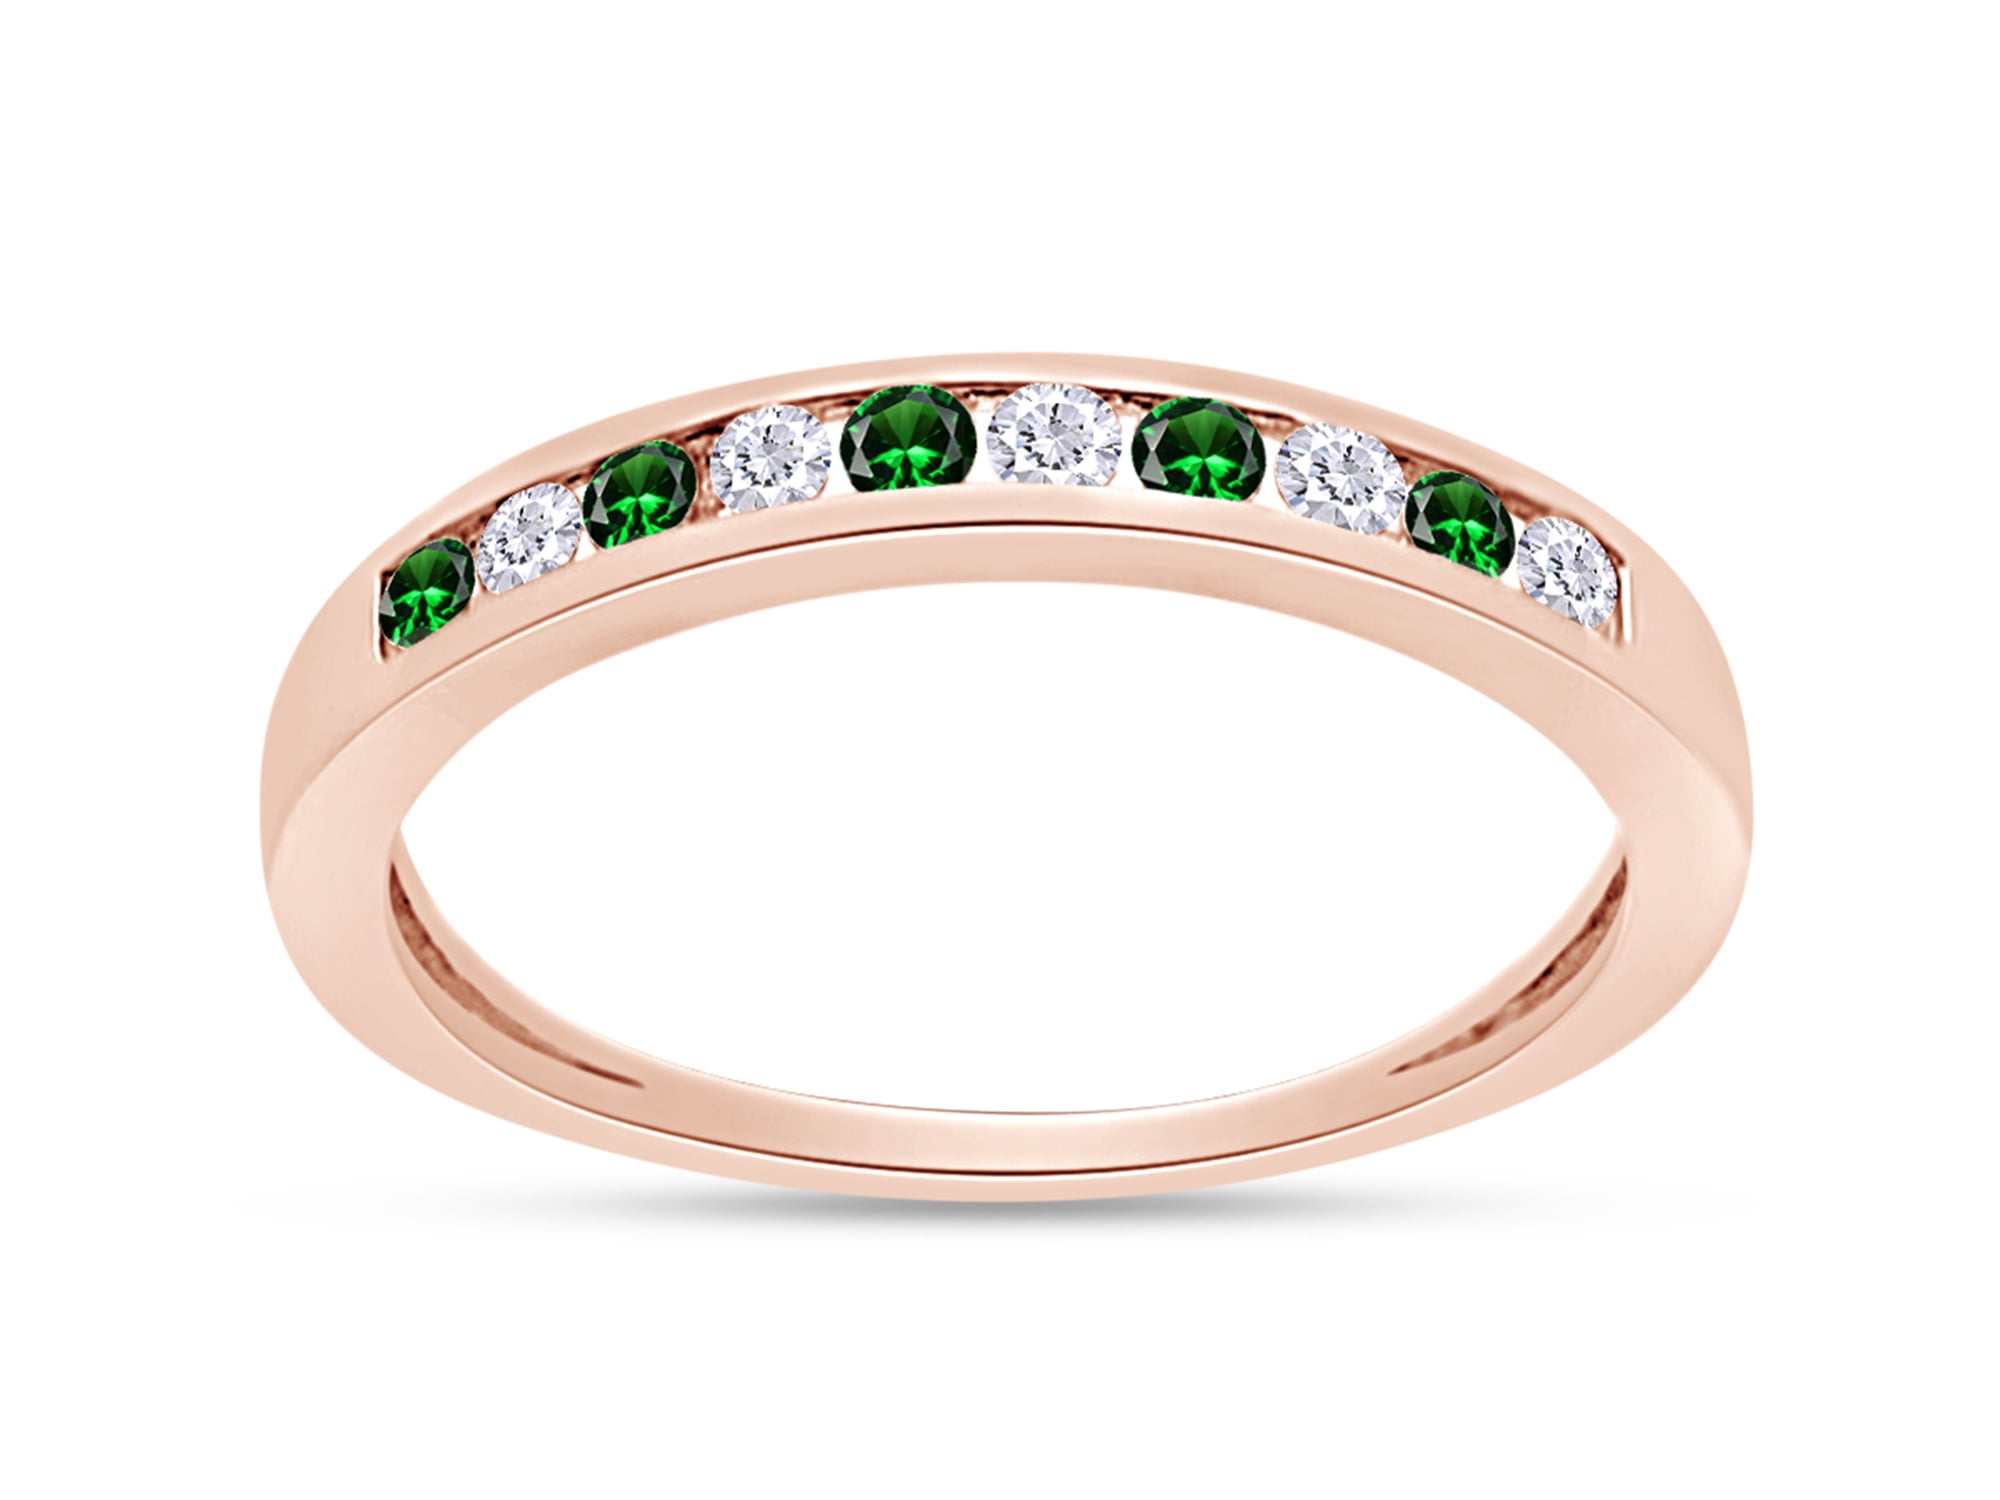 Details about   Green Emerald Vintage Style 925 Sterling Silver Handmade Solid CZ Ring for Women